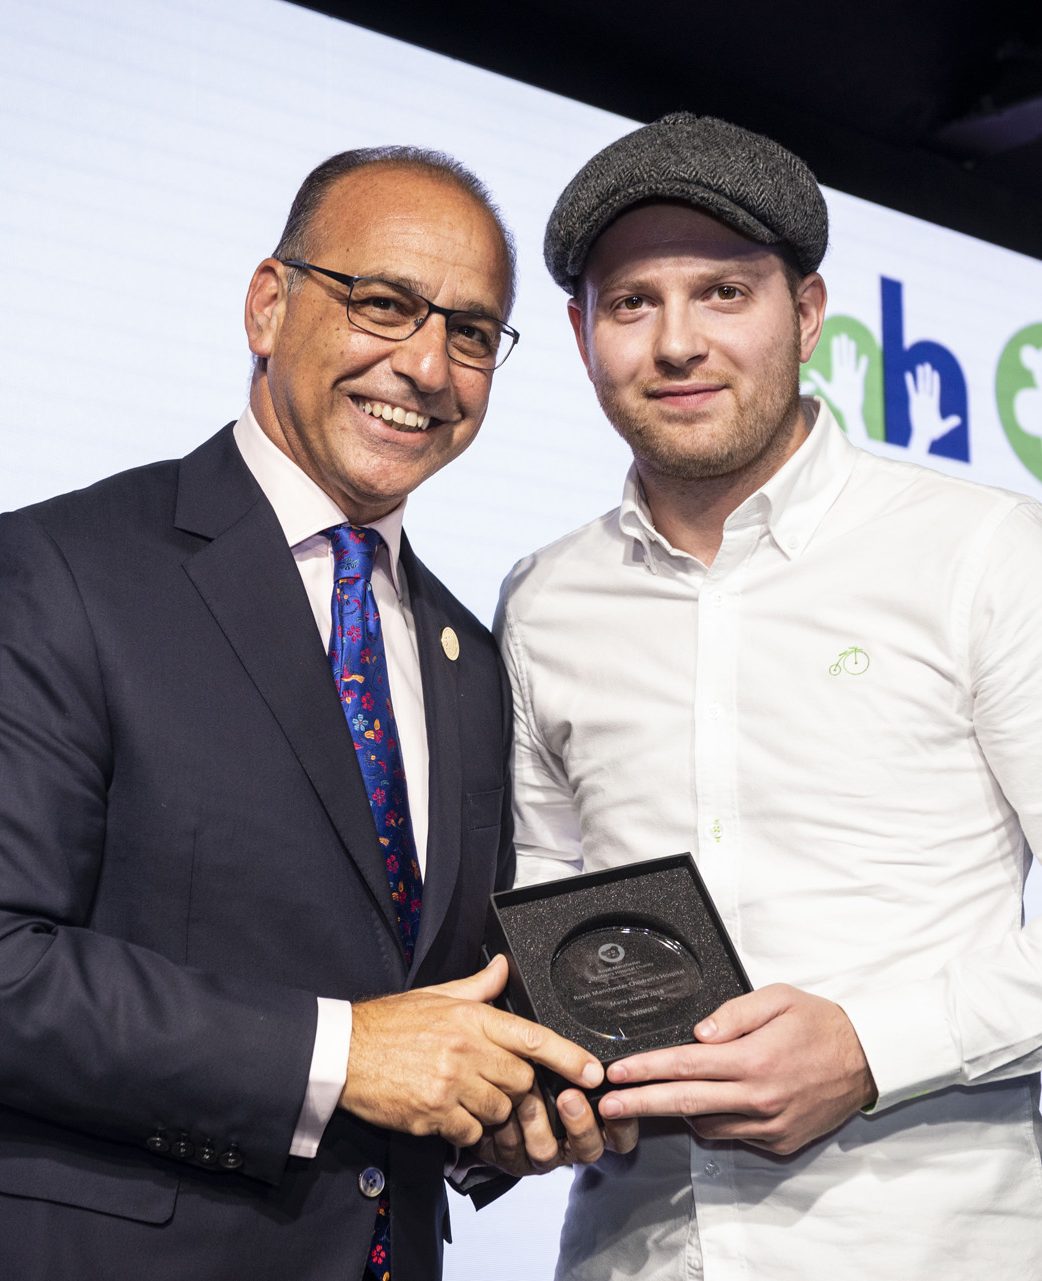 THEO PAPHITIS CROWNS-WE-ARE-GNTLMEN-MANY-HANDS-WINNERS